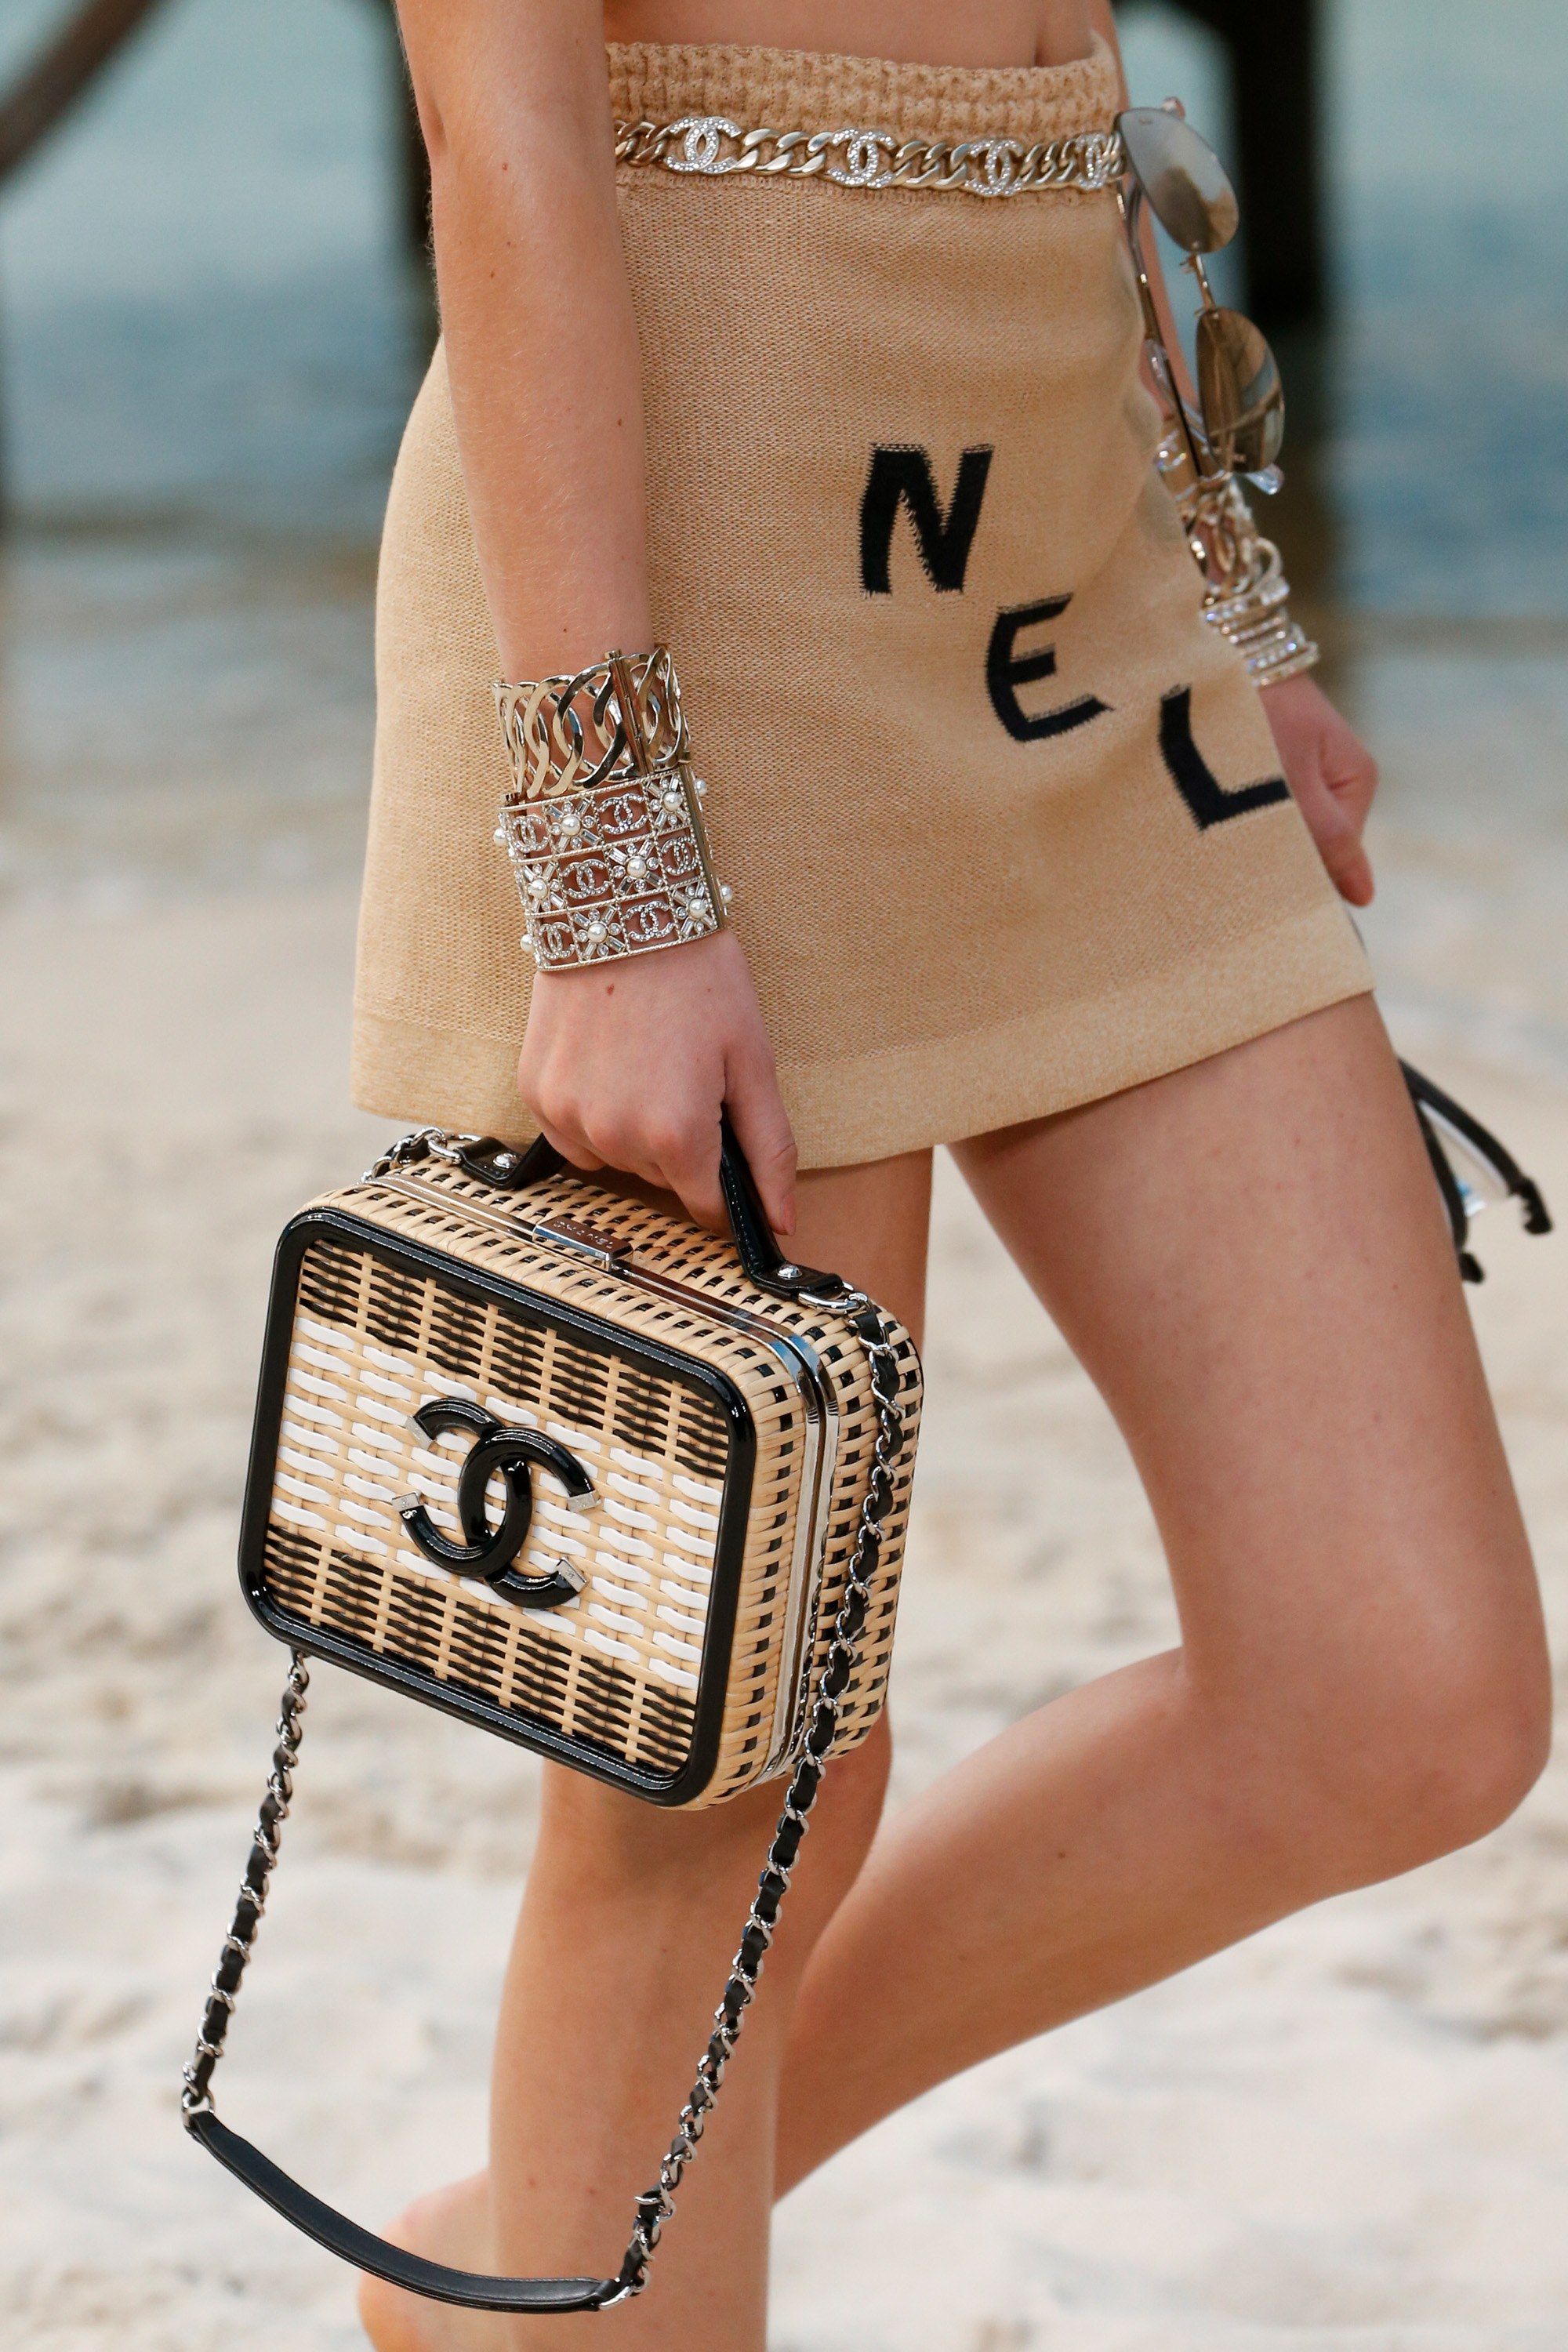 Chanel Spring/Summer 2019 Runway Bag Collection - Chanel By The Sea | Spotted Fashion